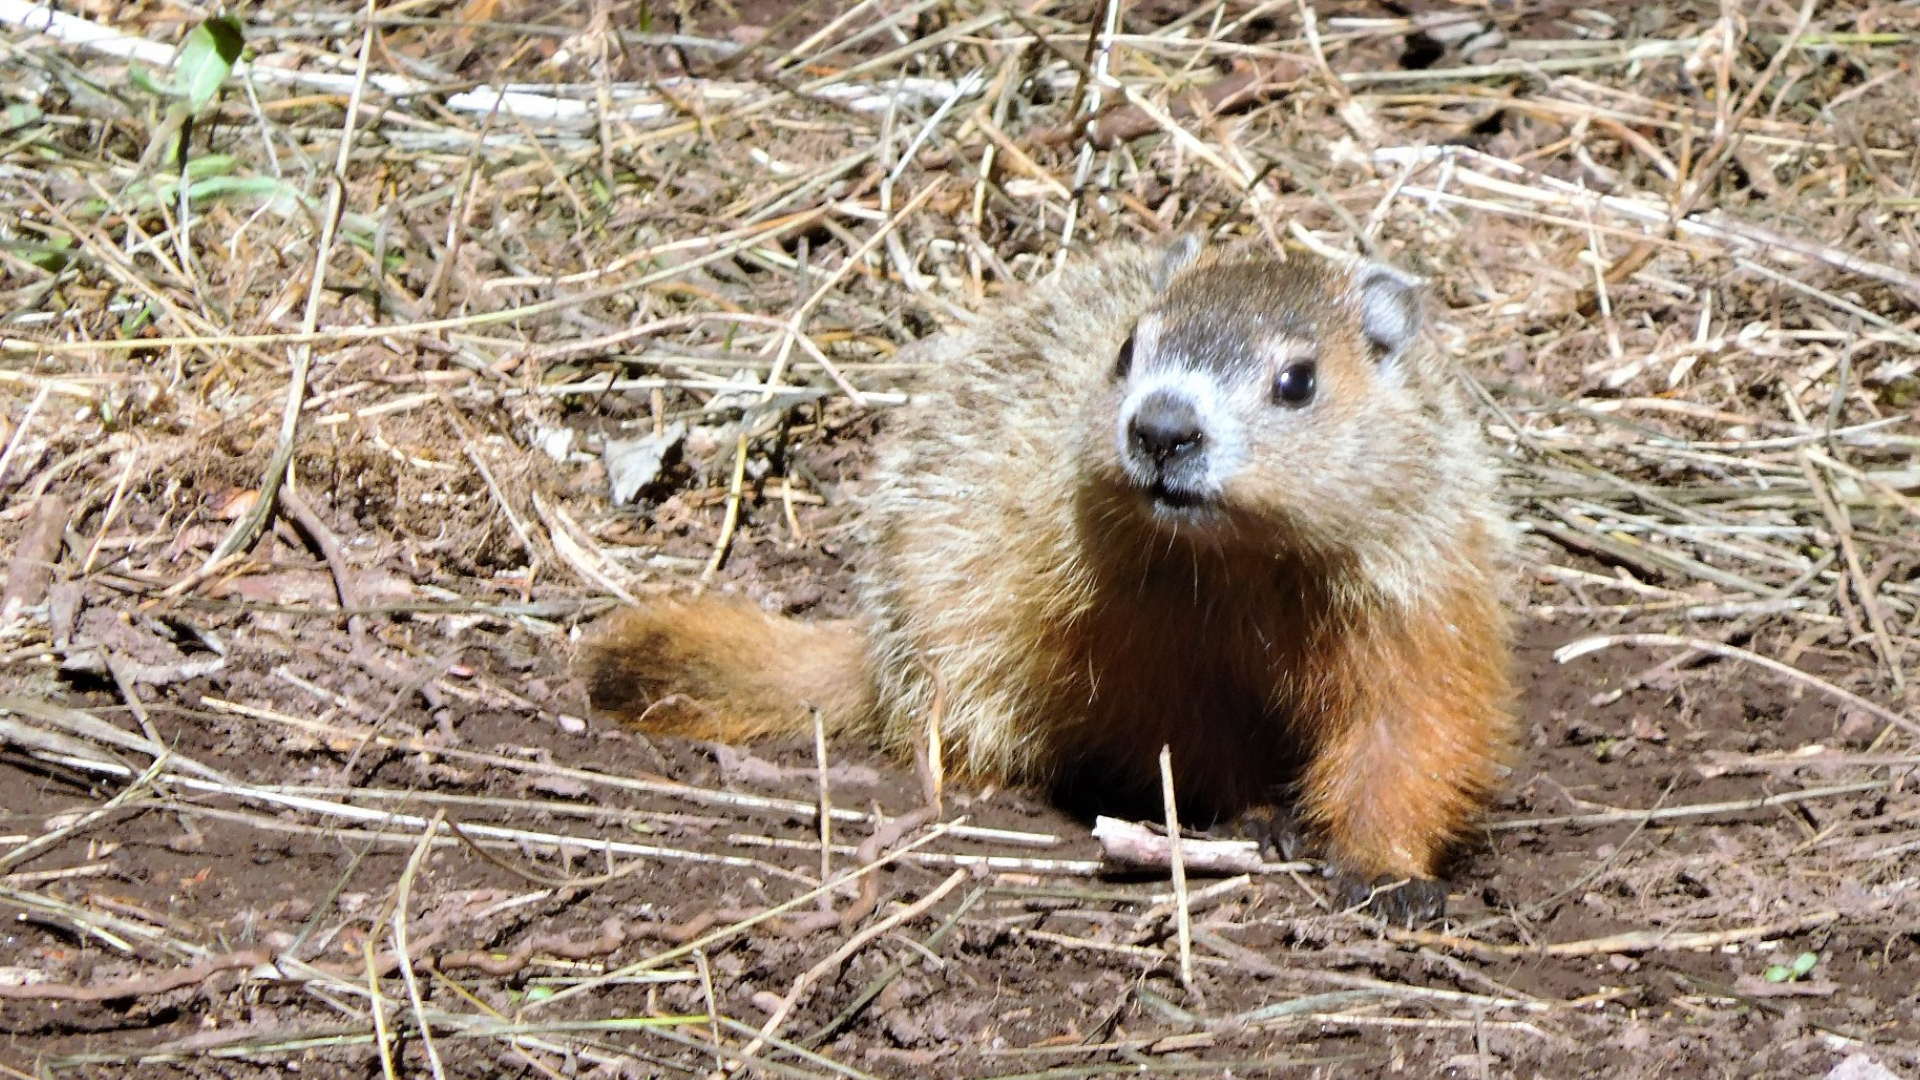 Fred the groundhog dies before Groundhog Day prediction